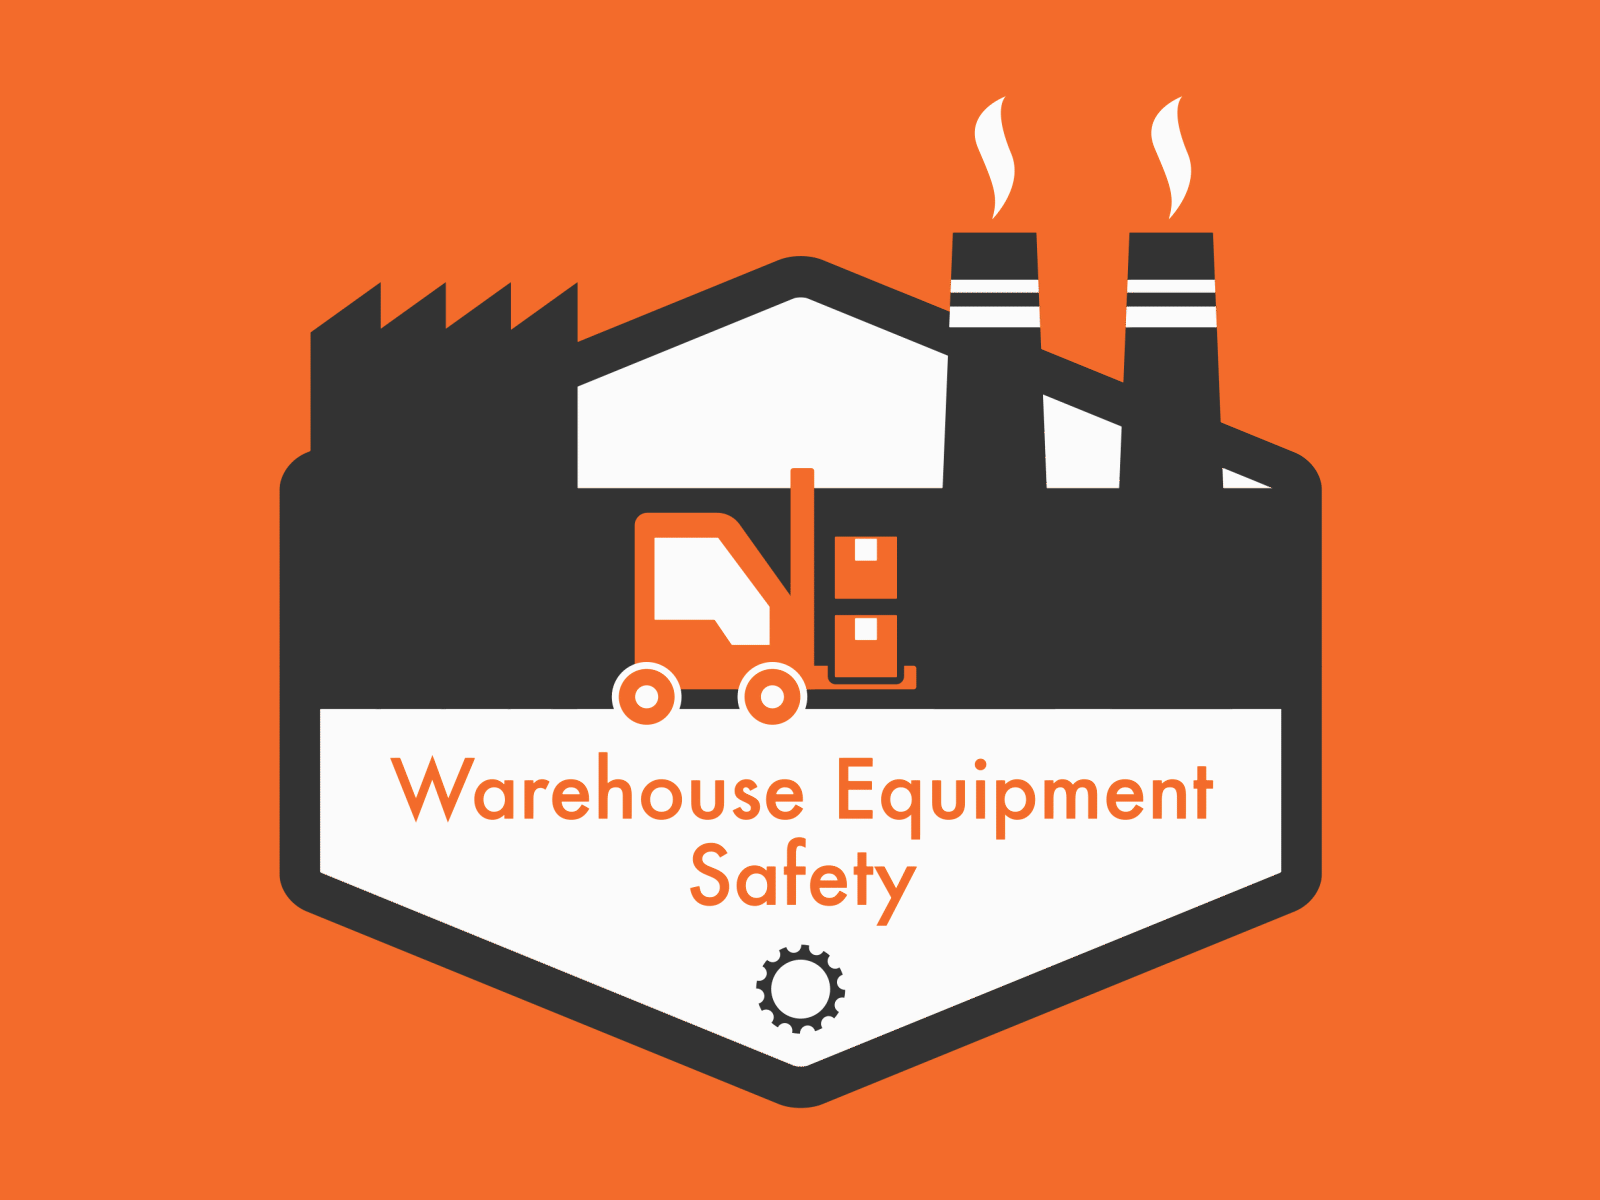 Warehouse Safety Logo after effects elearning environmental health and safety factory forklift gif hilo illustration logo manufacturing motion graphic safety training warehouse safety warhouse